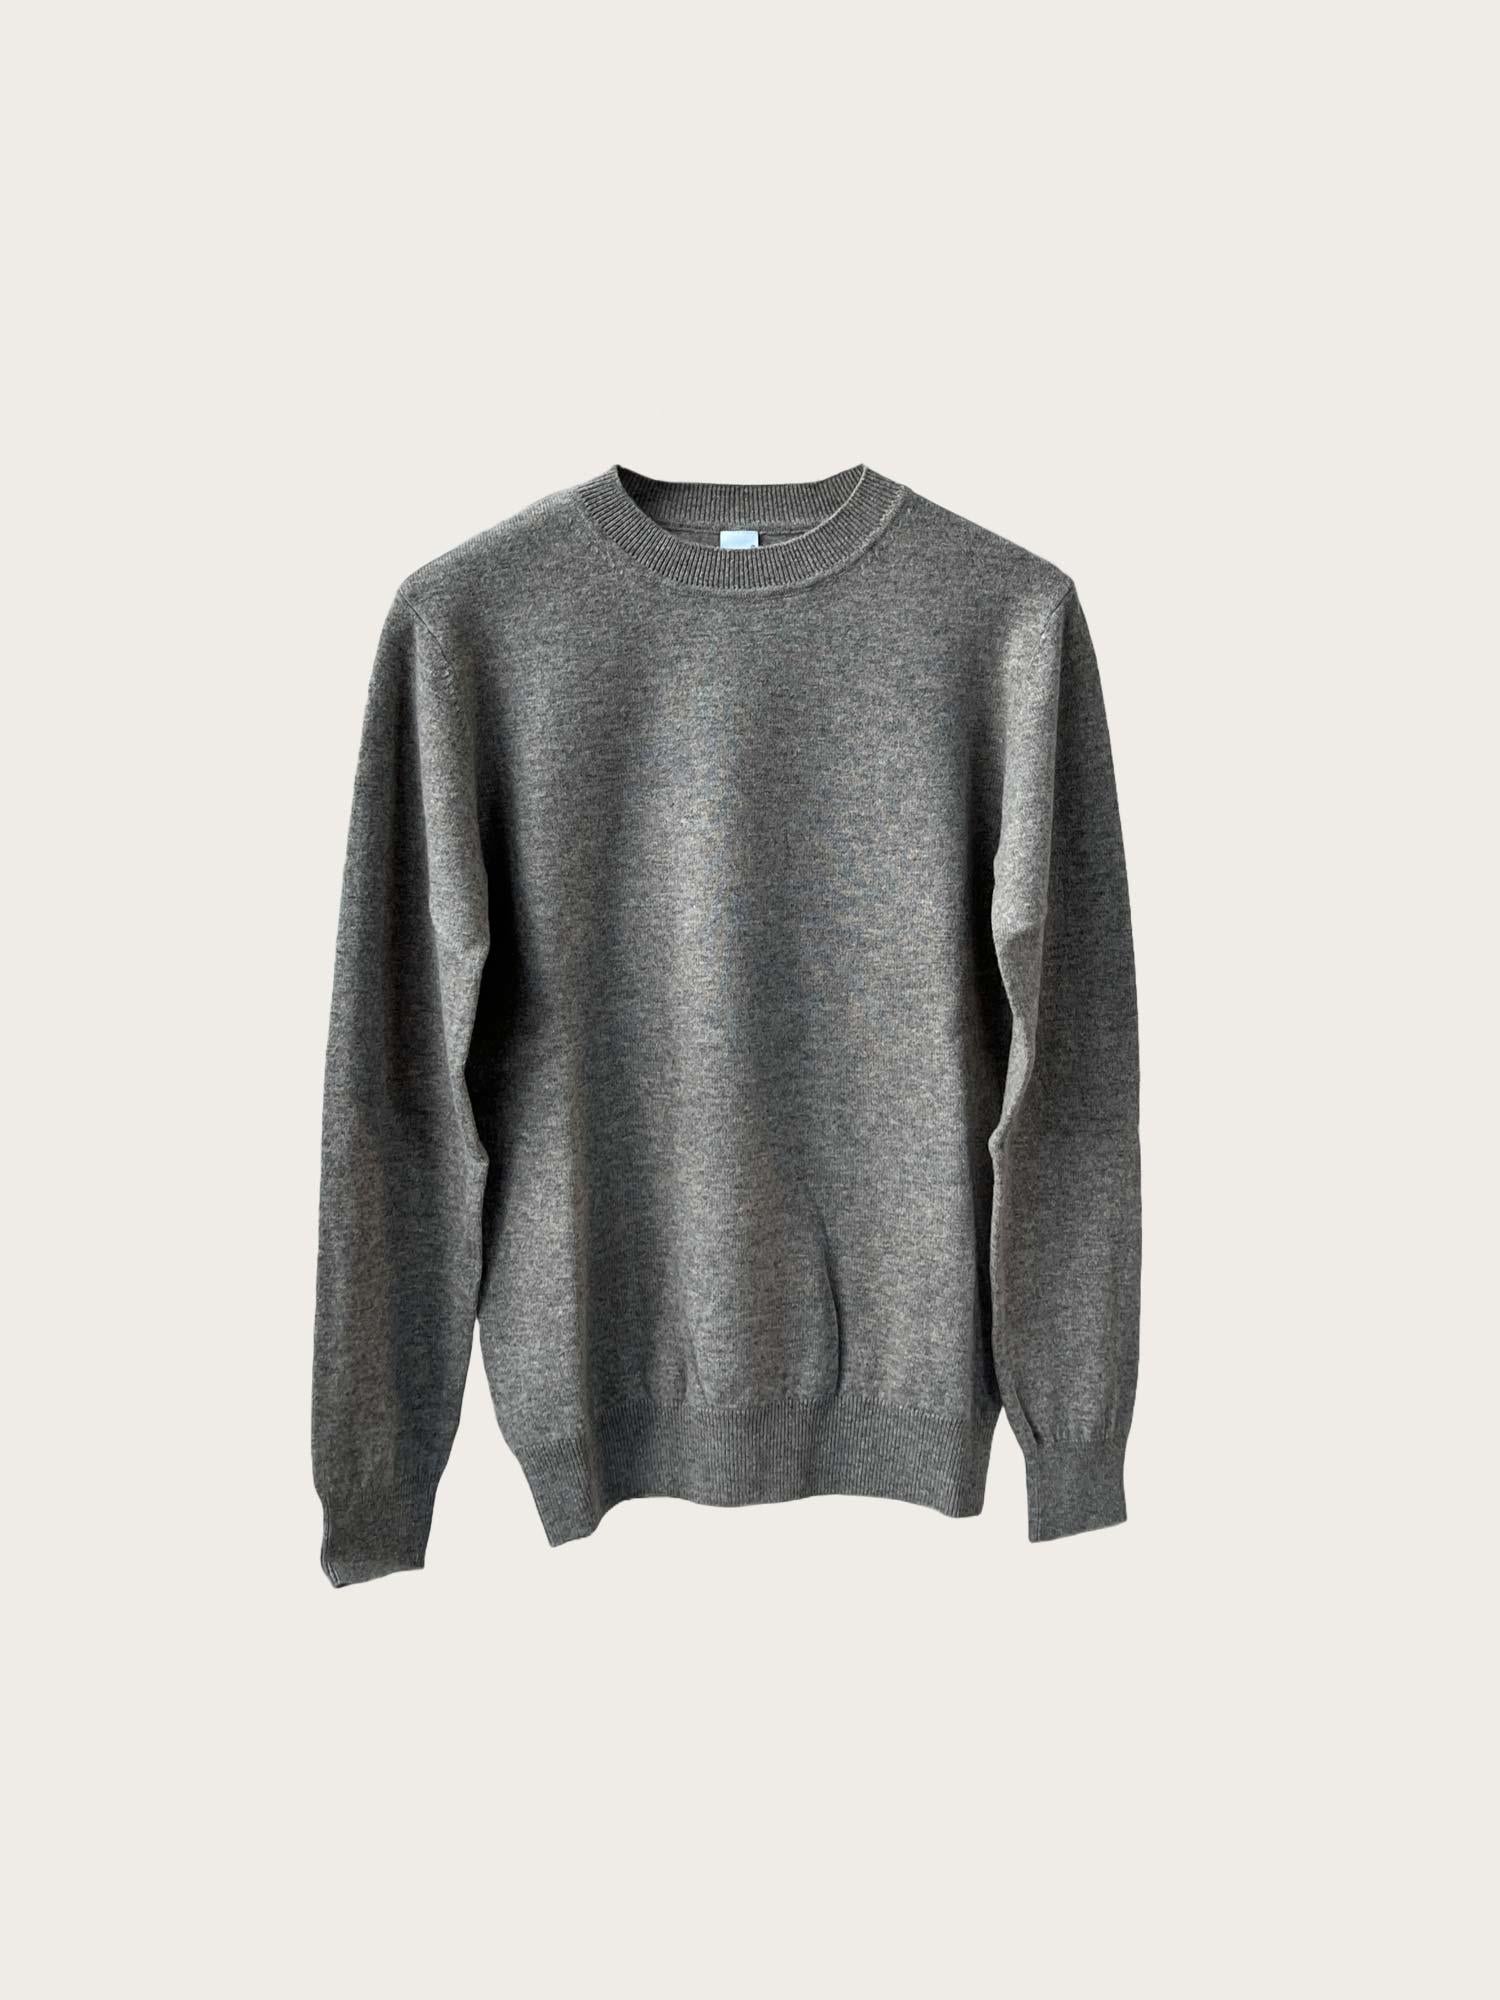 Knitted Crewneck Sweater - Pecan